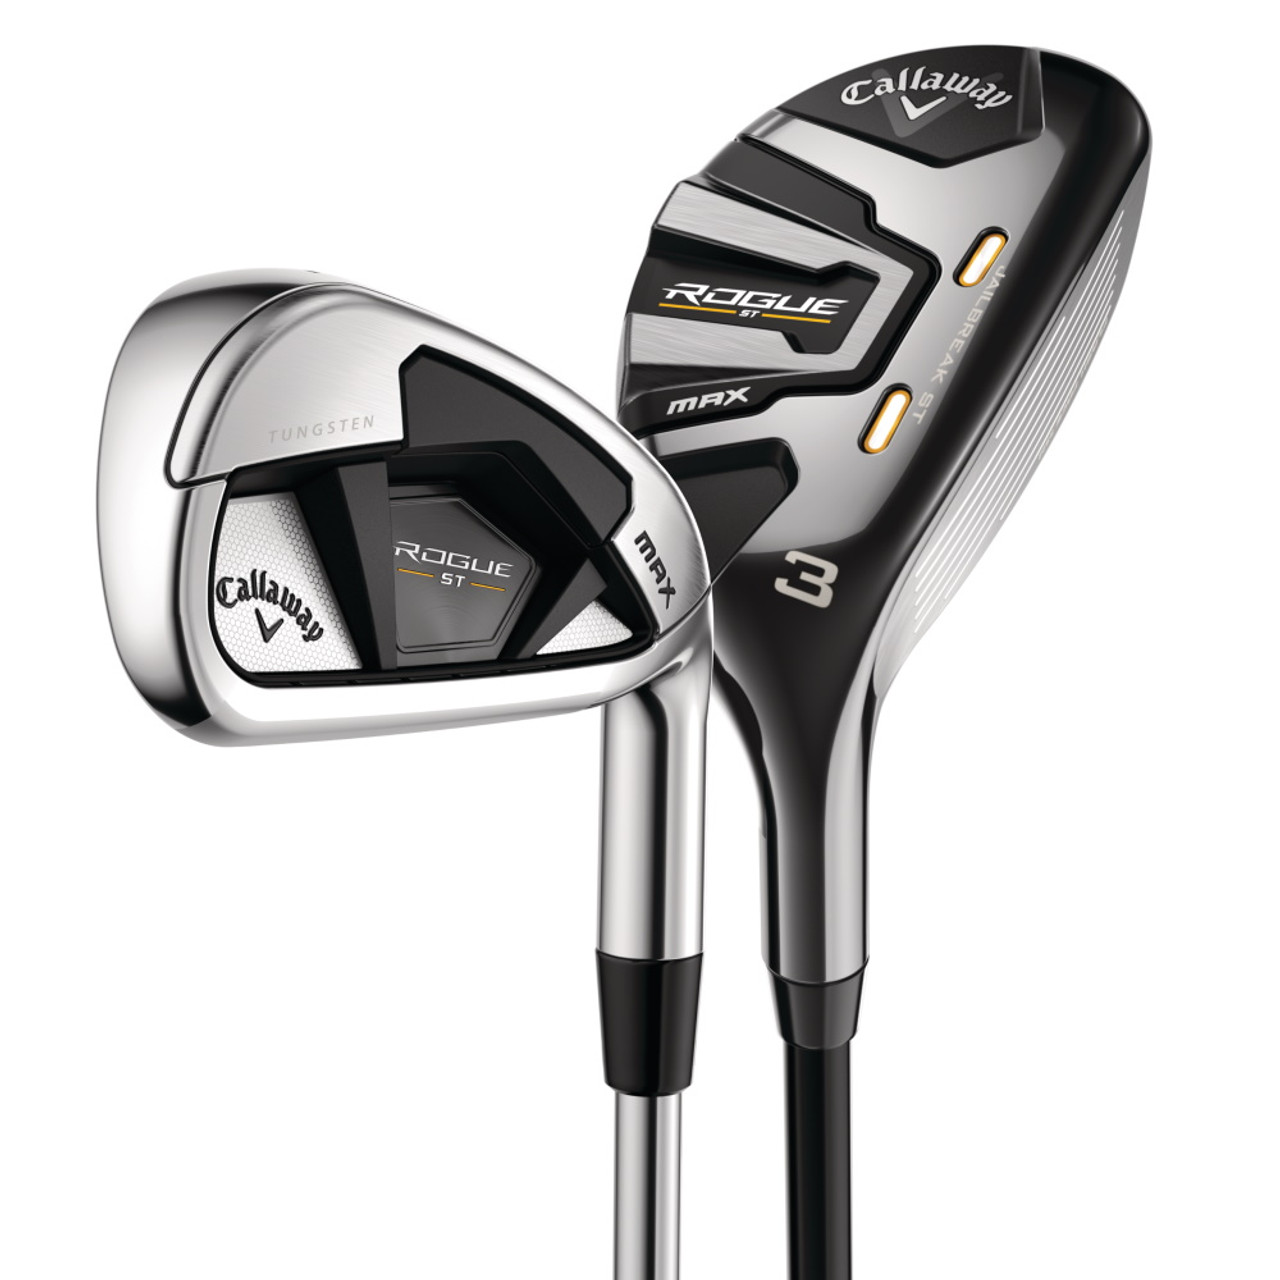 Callaway Rogue ST Max Combo Irons | Steel Iron Shafts - Just Say Golf